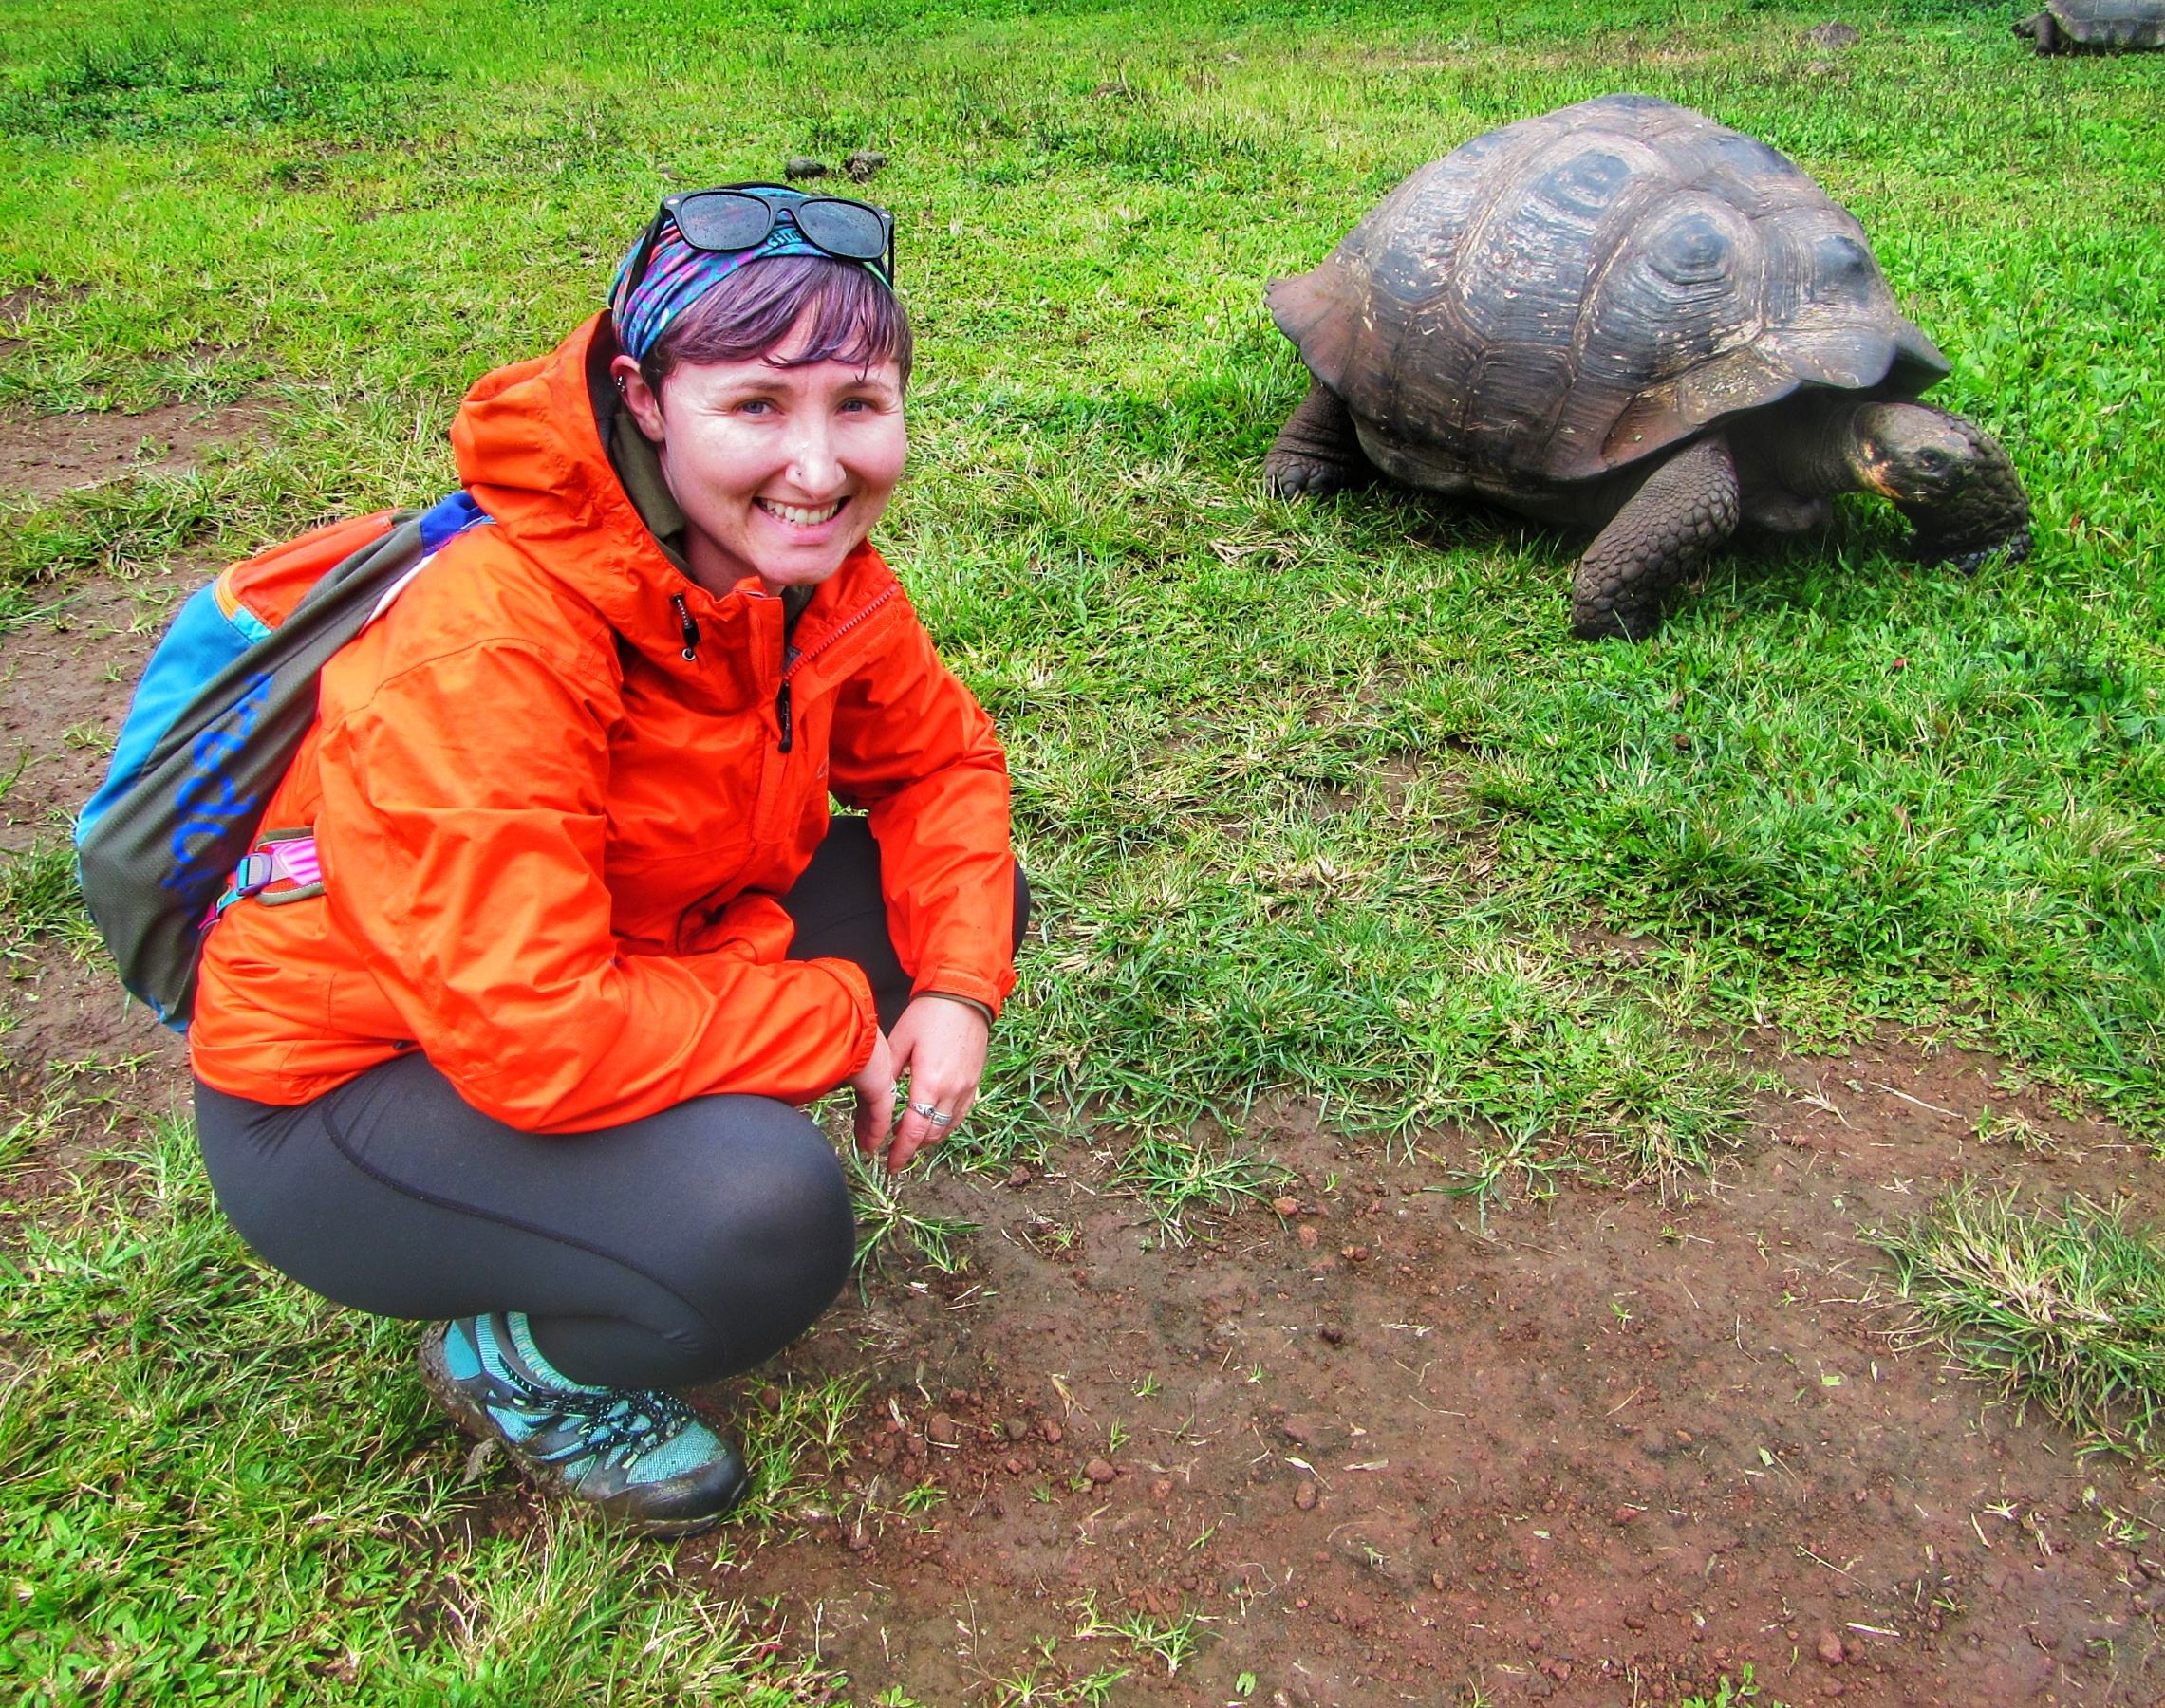  Hanging out with tortoises in the Galapagos Islands - September, 2017 